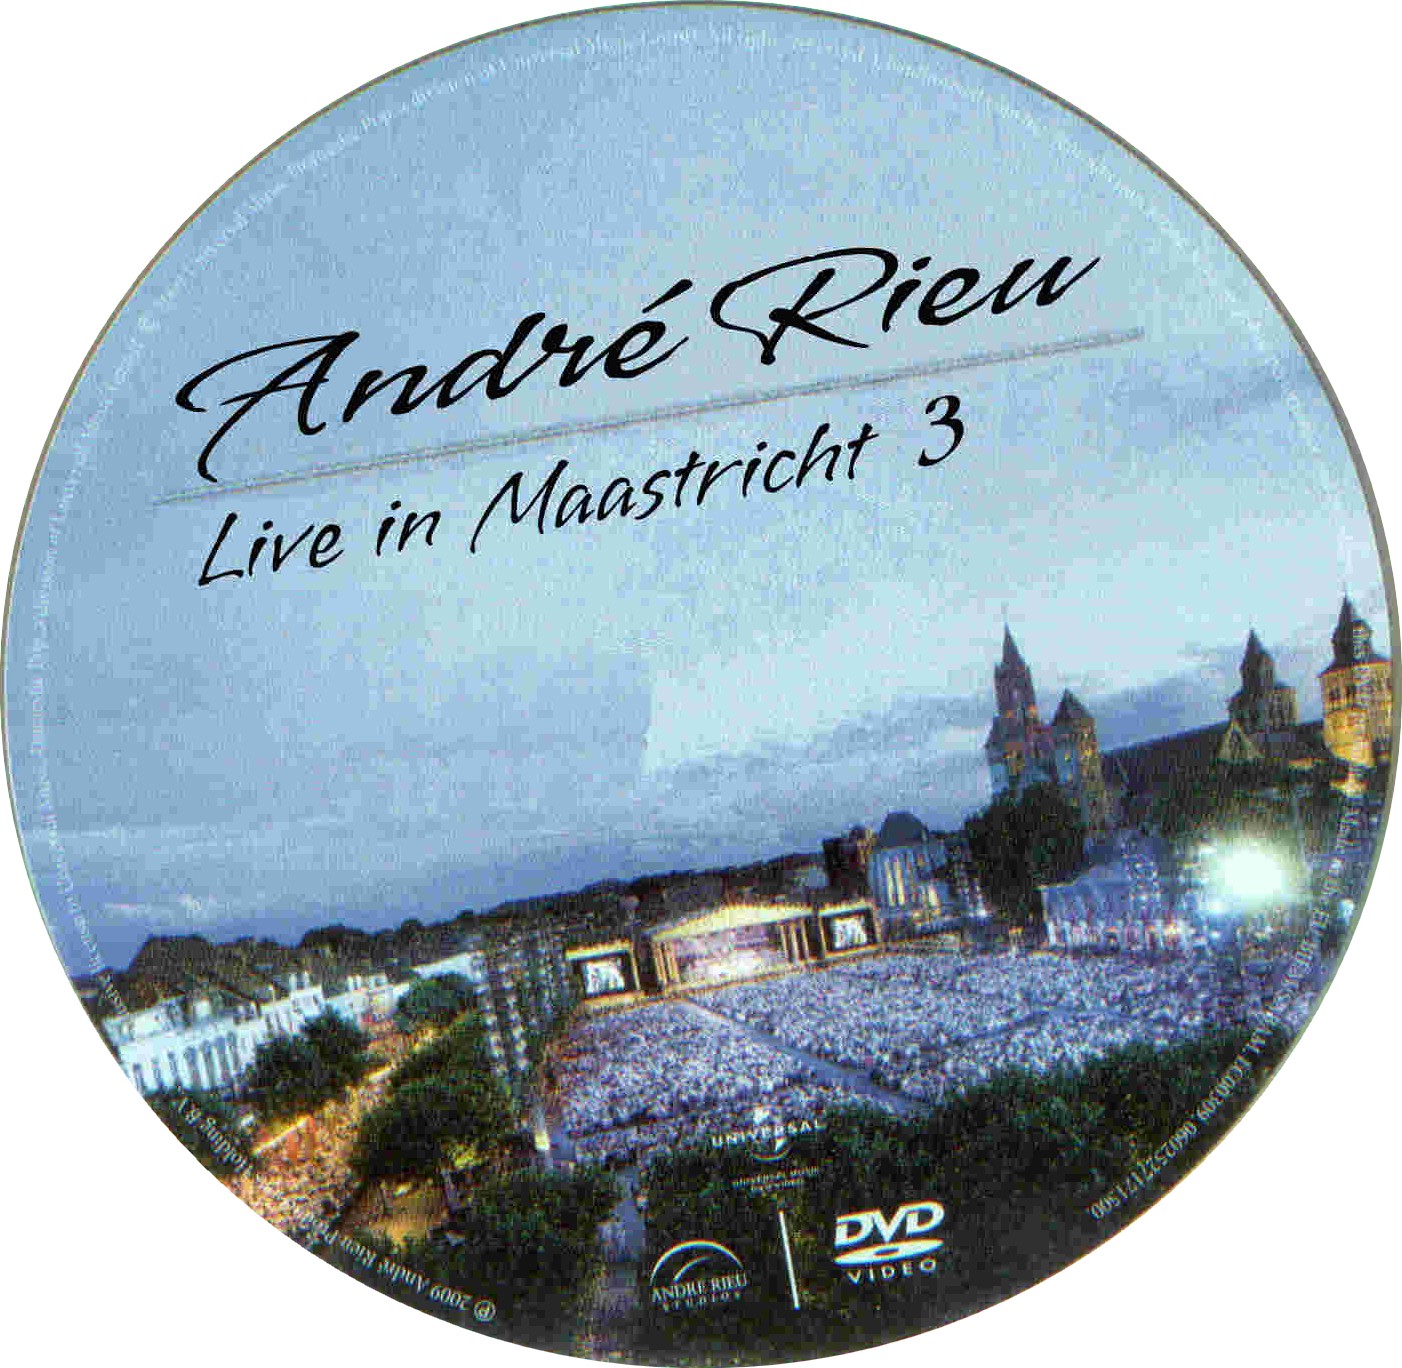 Andre Rieu Live in Maastricht 3